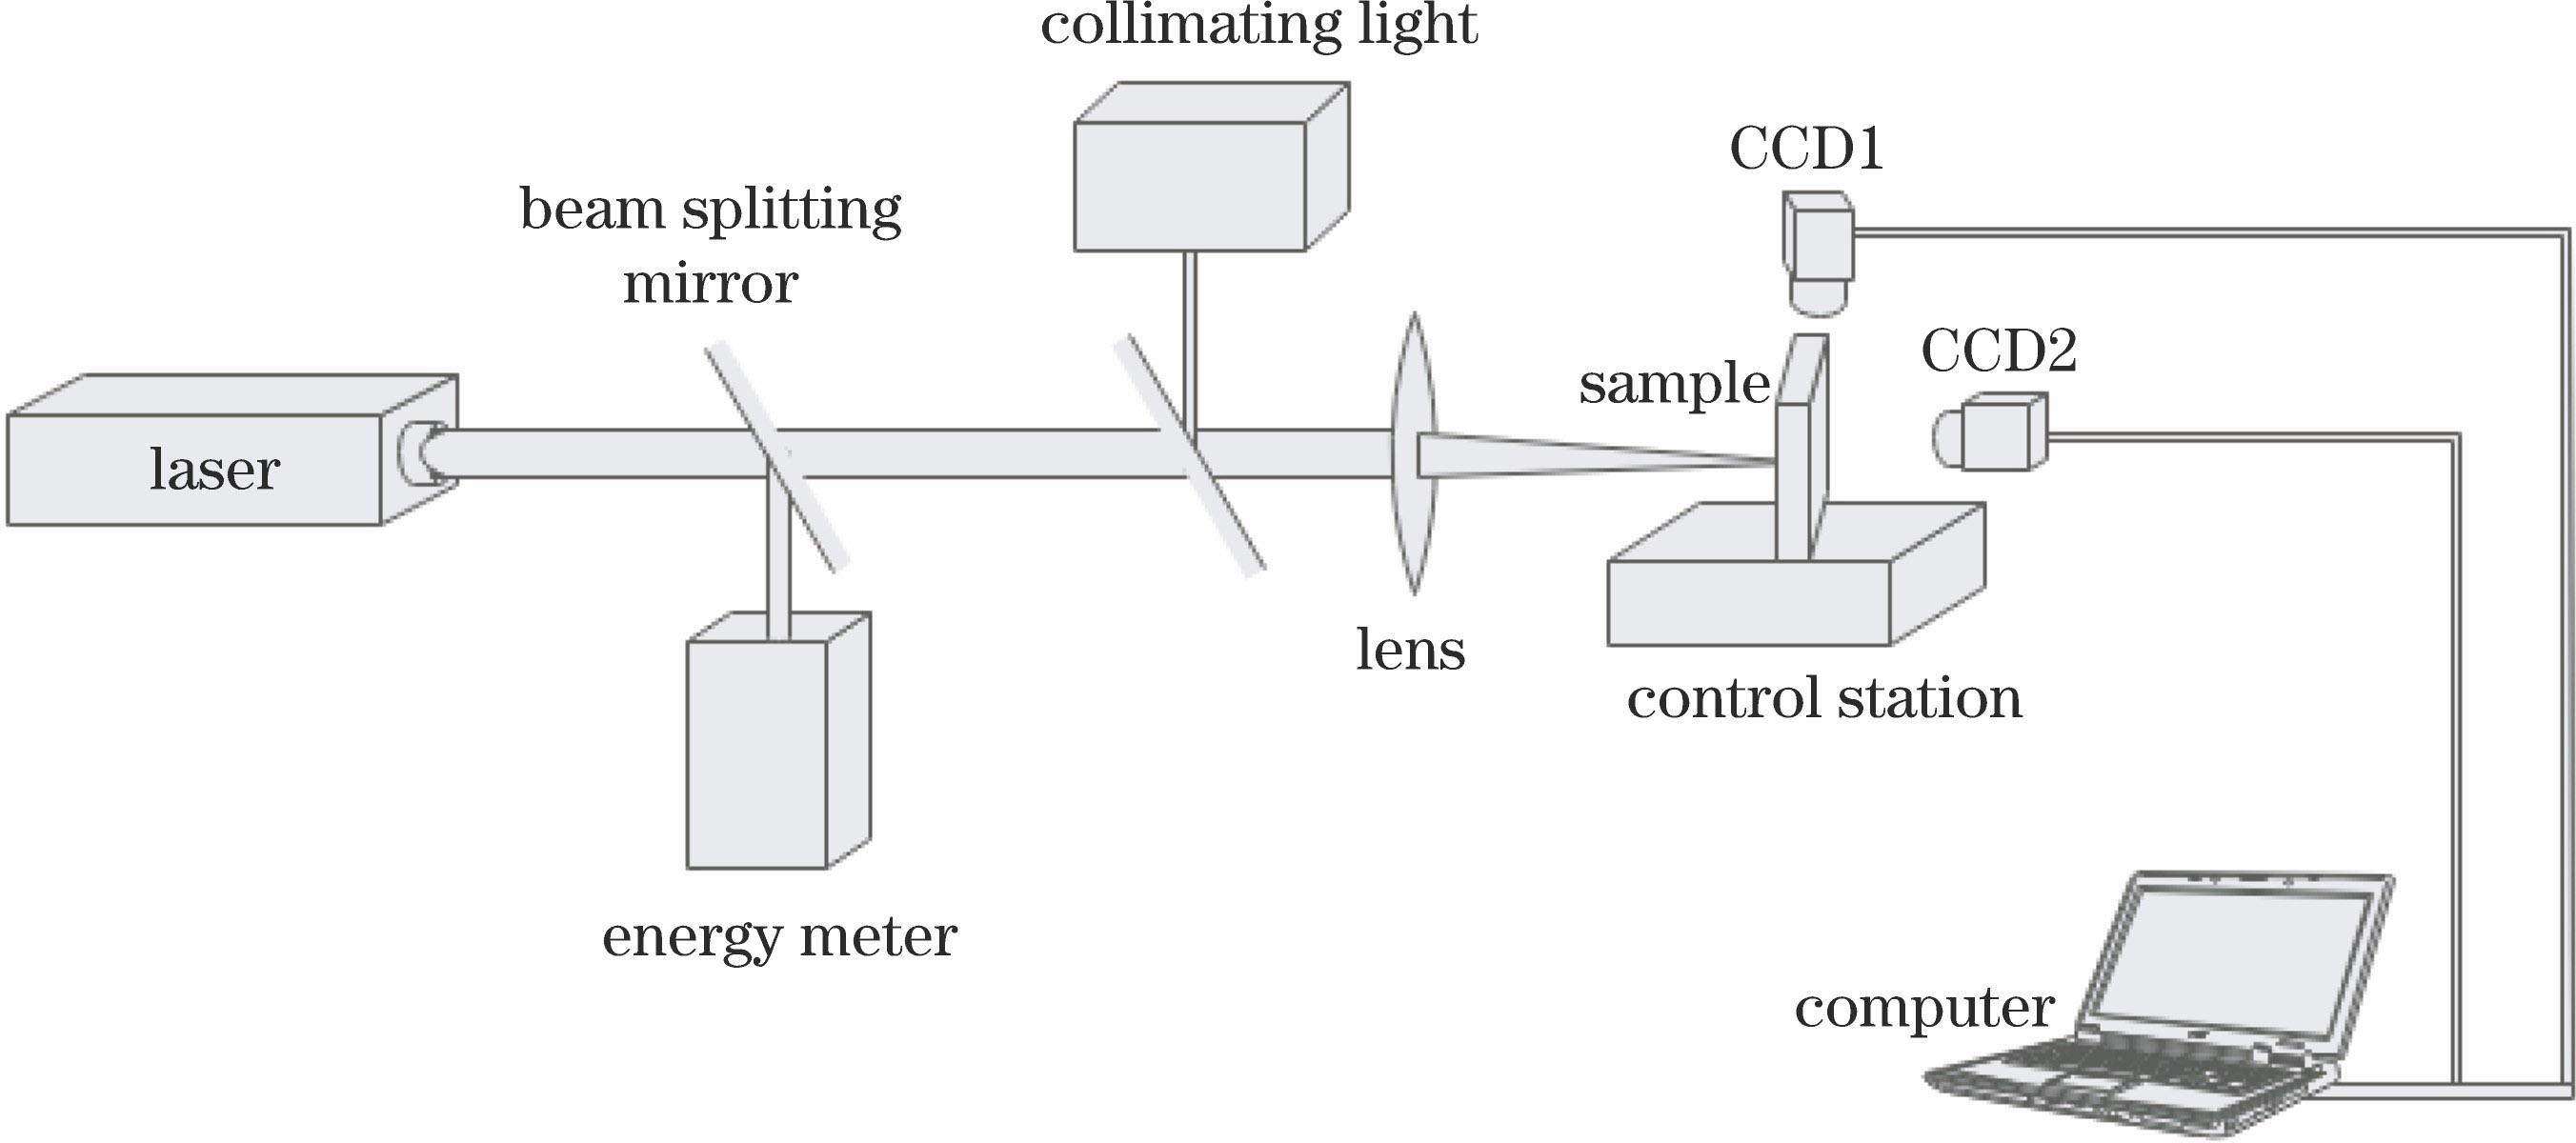 Schematic of experimental system